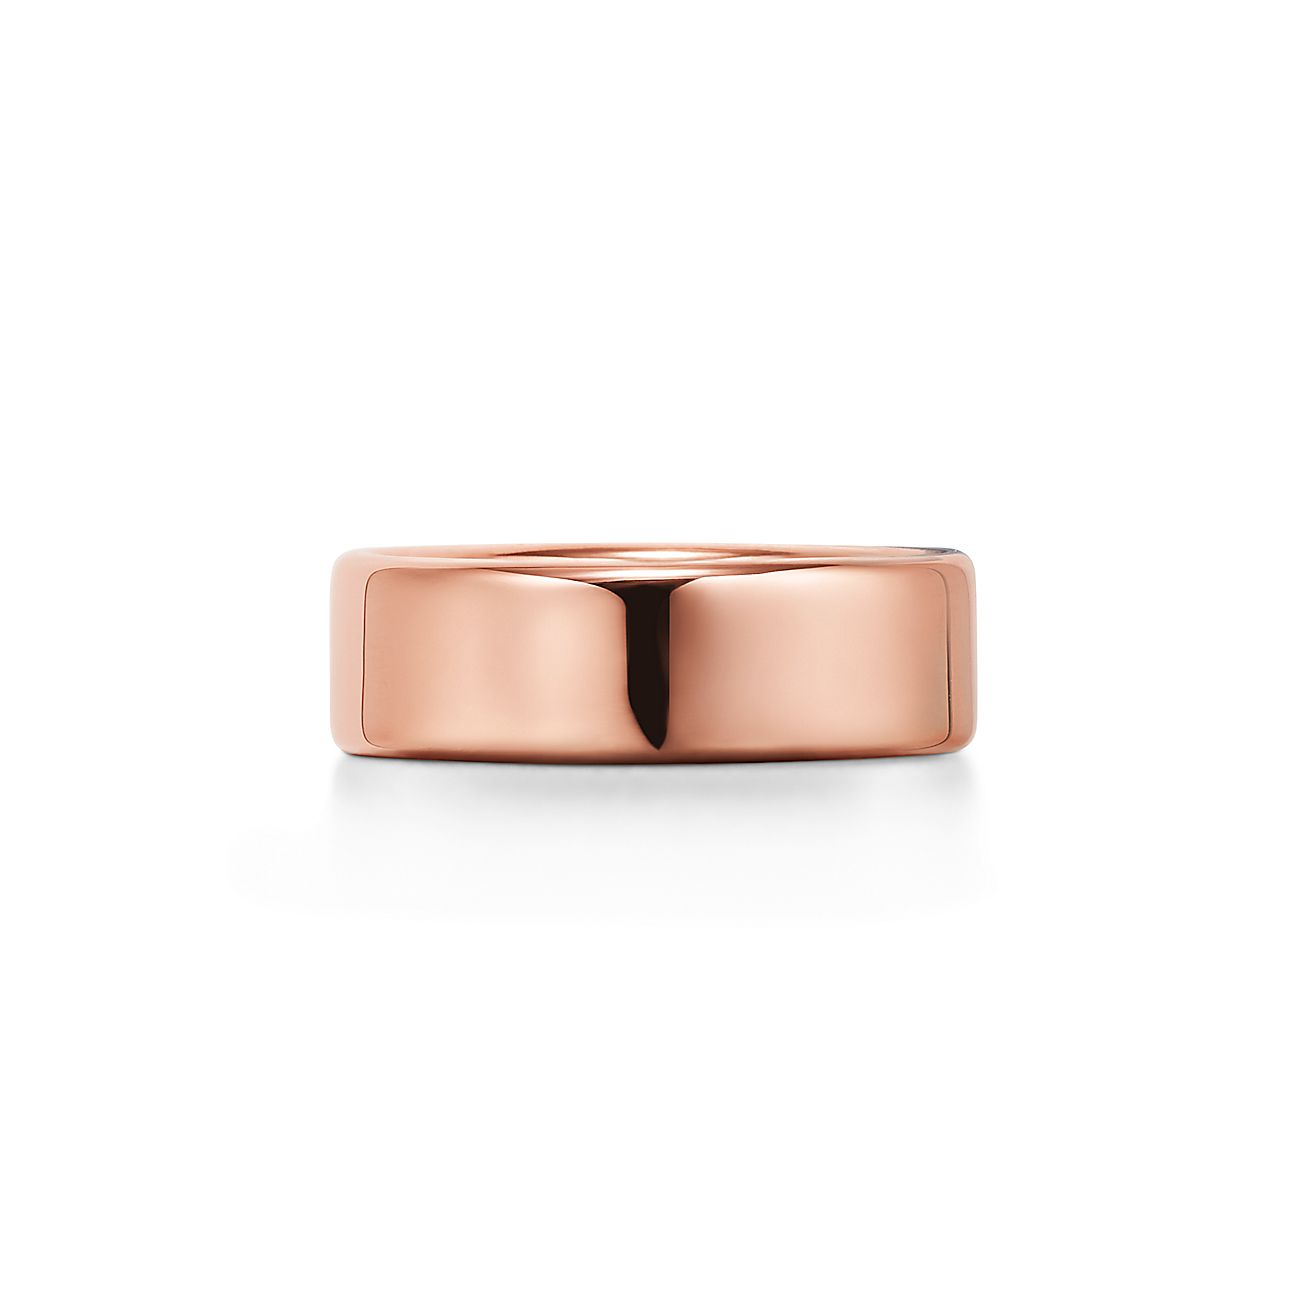 Return to Tiffany® narrow ring in sterling silver with diamonds, 6 mm wide.